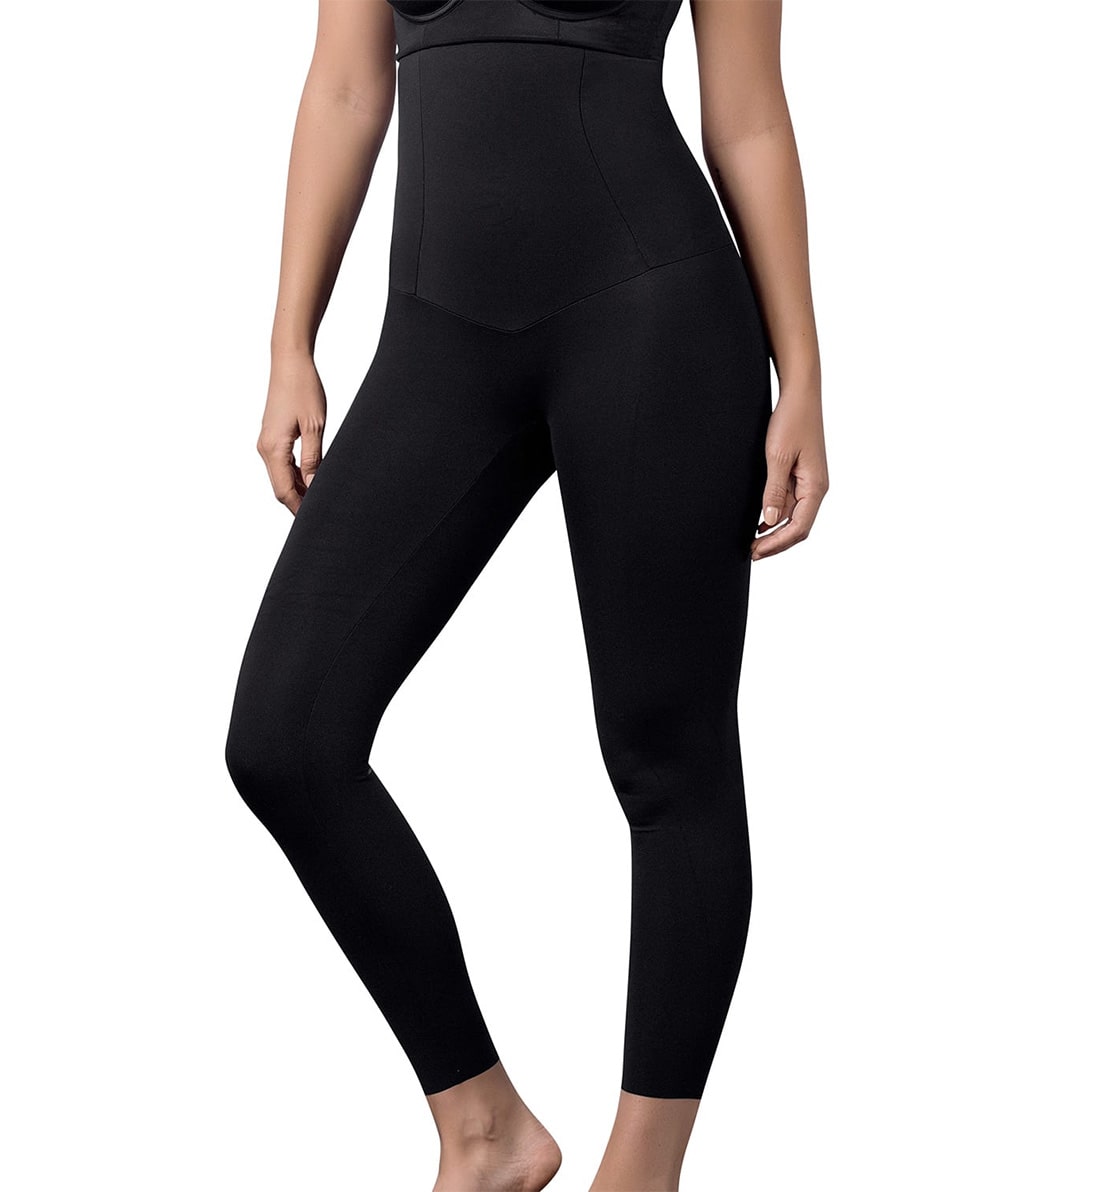 Leonisa Extra High-Waisted Firm Compression Legging (012901),Small,Black - Black,Small